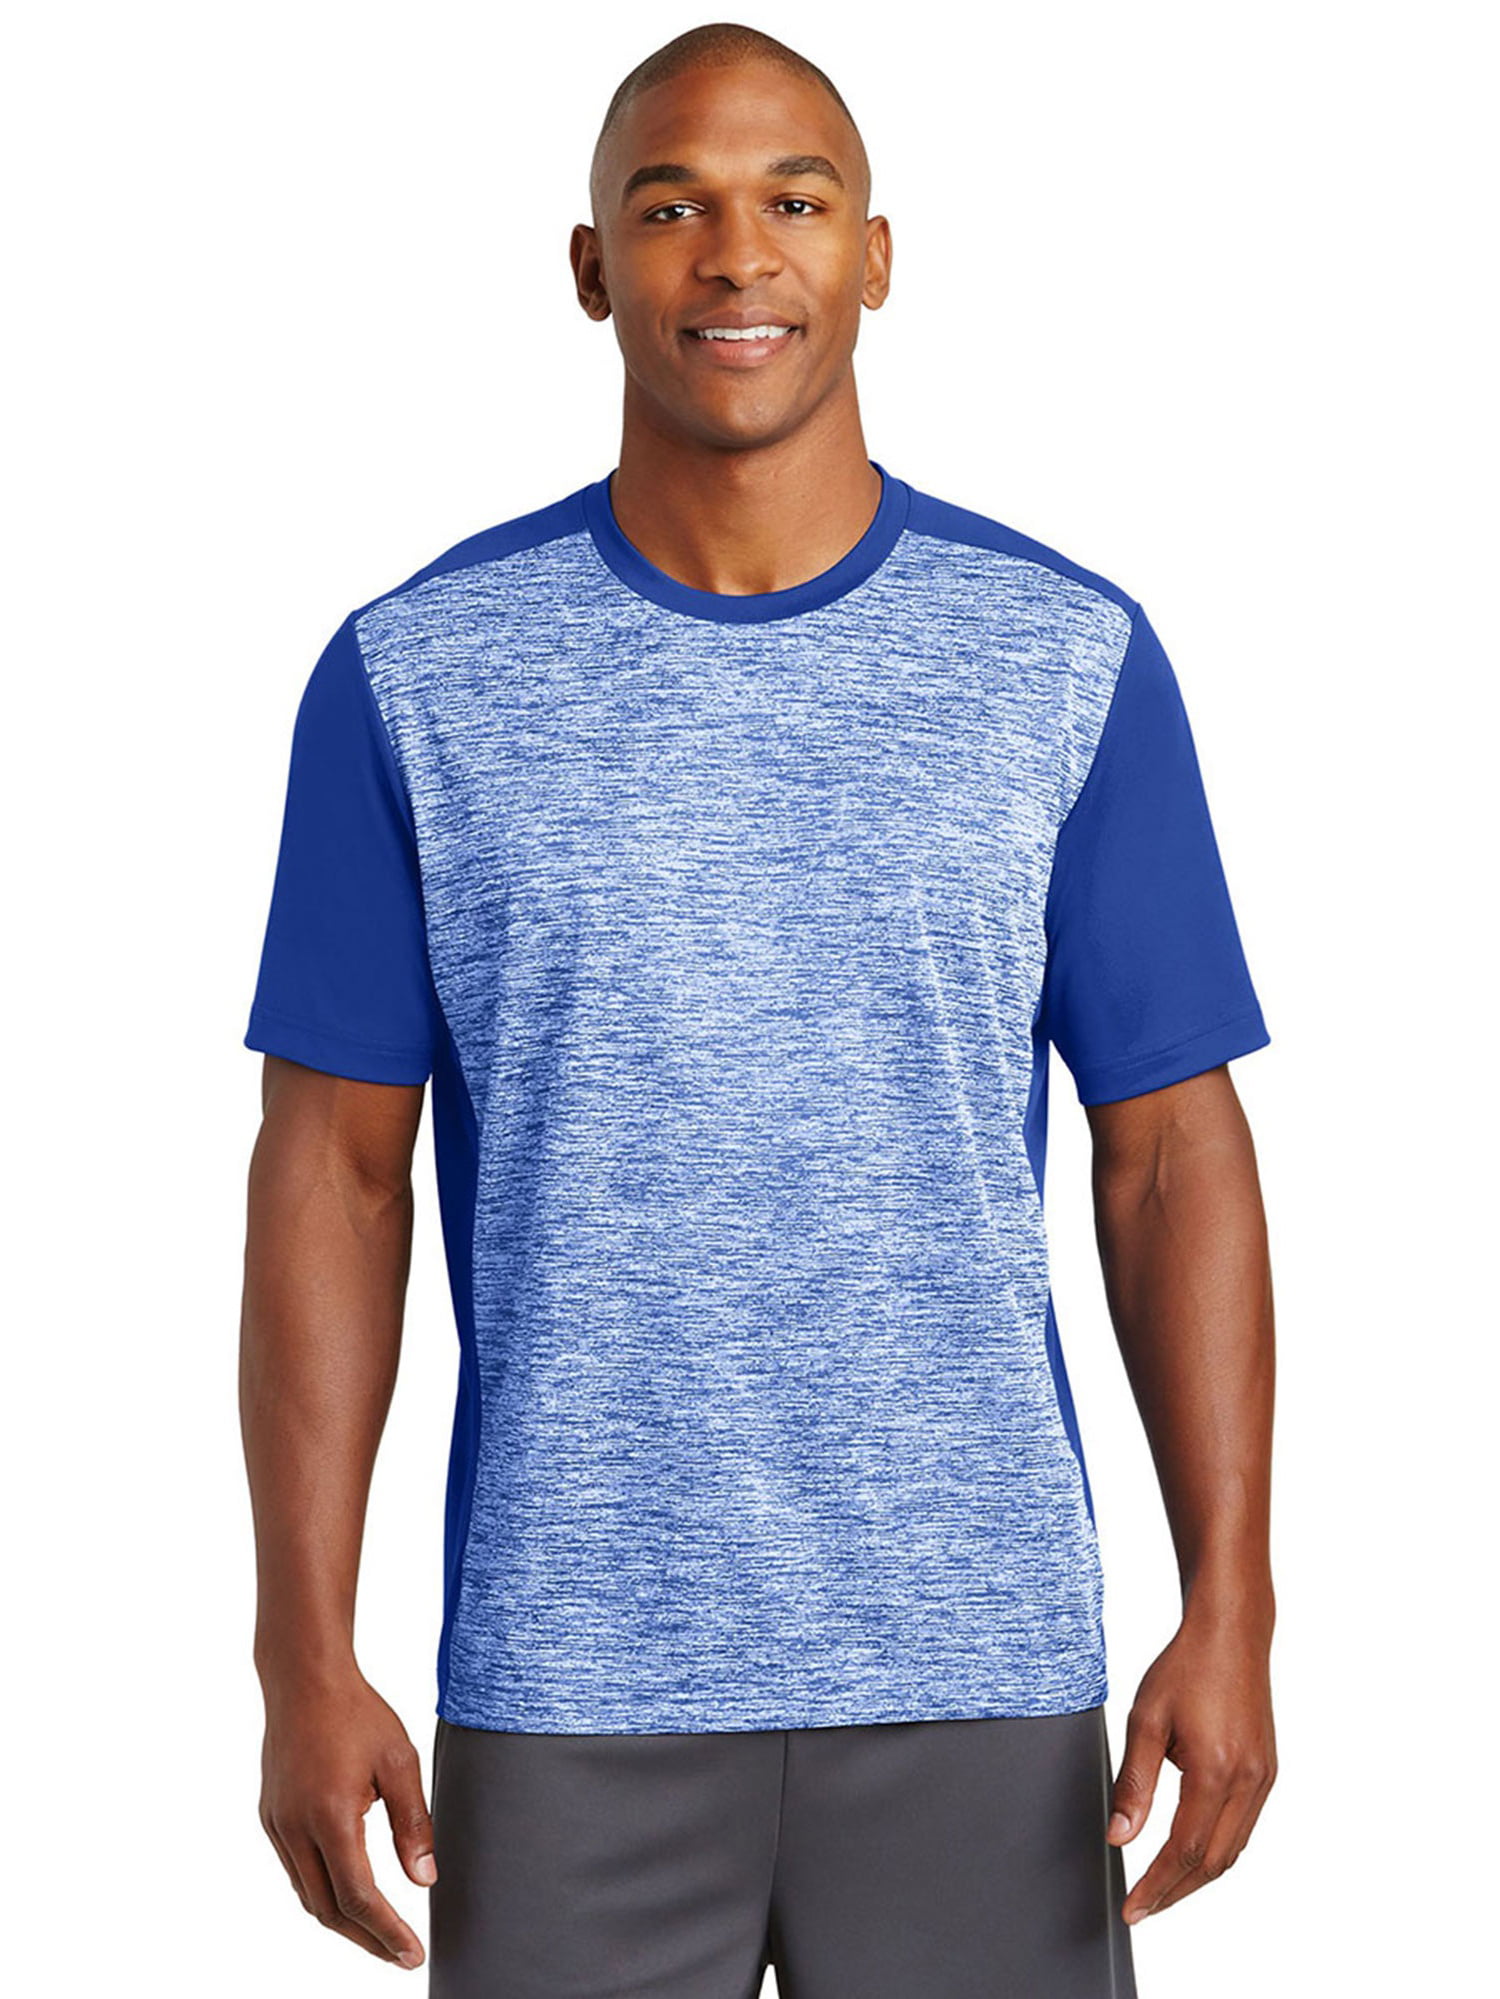 Mens Sport-Tek Competitor Colorblock Dry Fit Performance Wicking T-shirt ST351